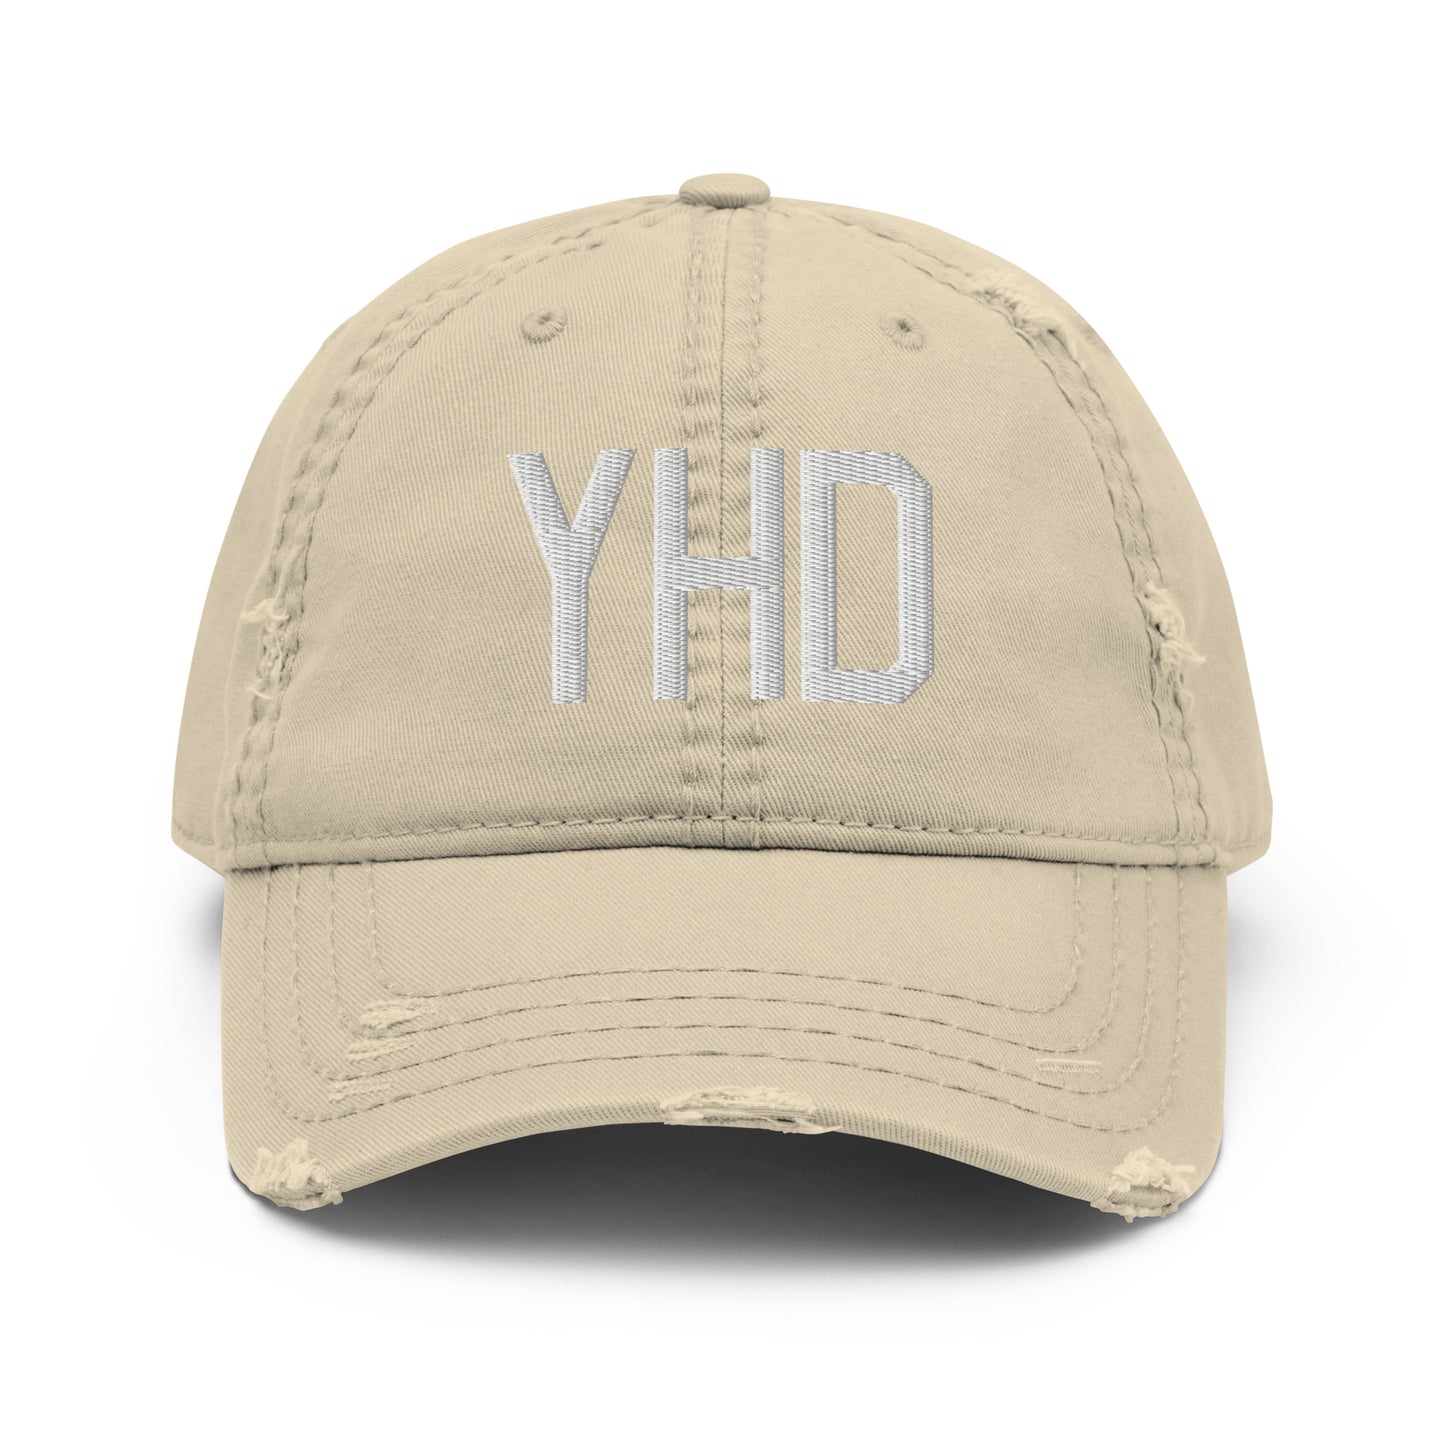 Airport Code Distressed Hat - White • YHD Dryden • YHM Designs - Image 18